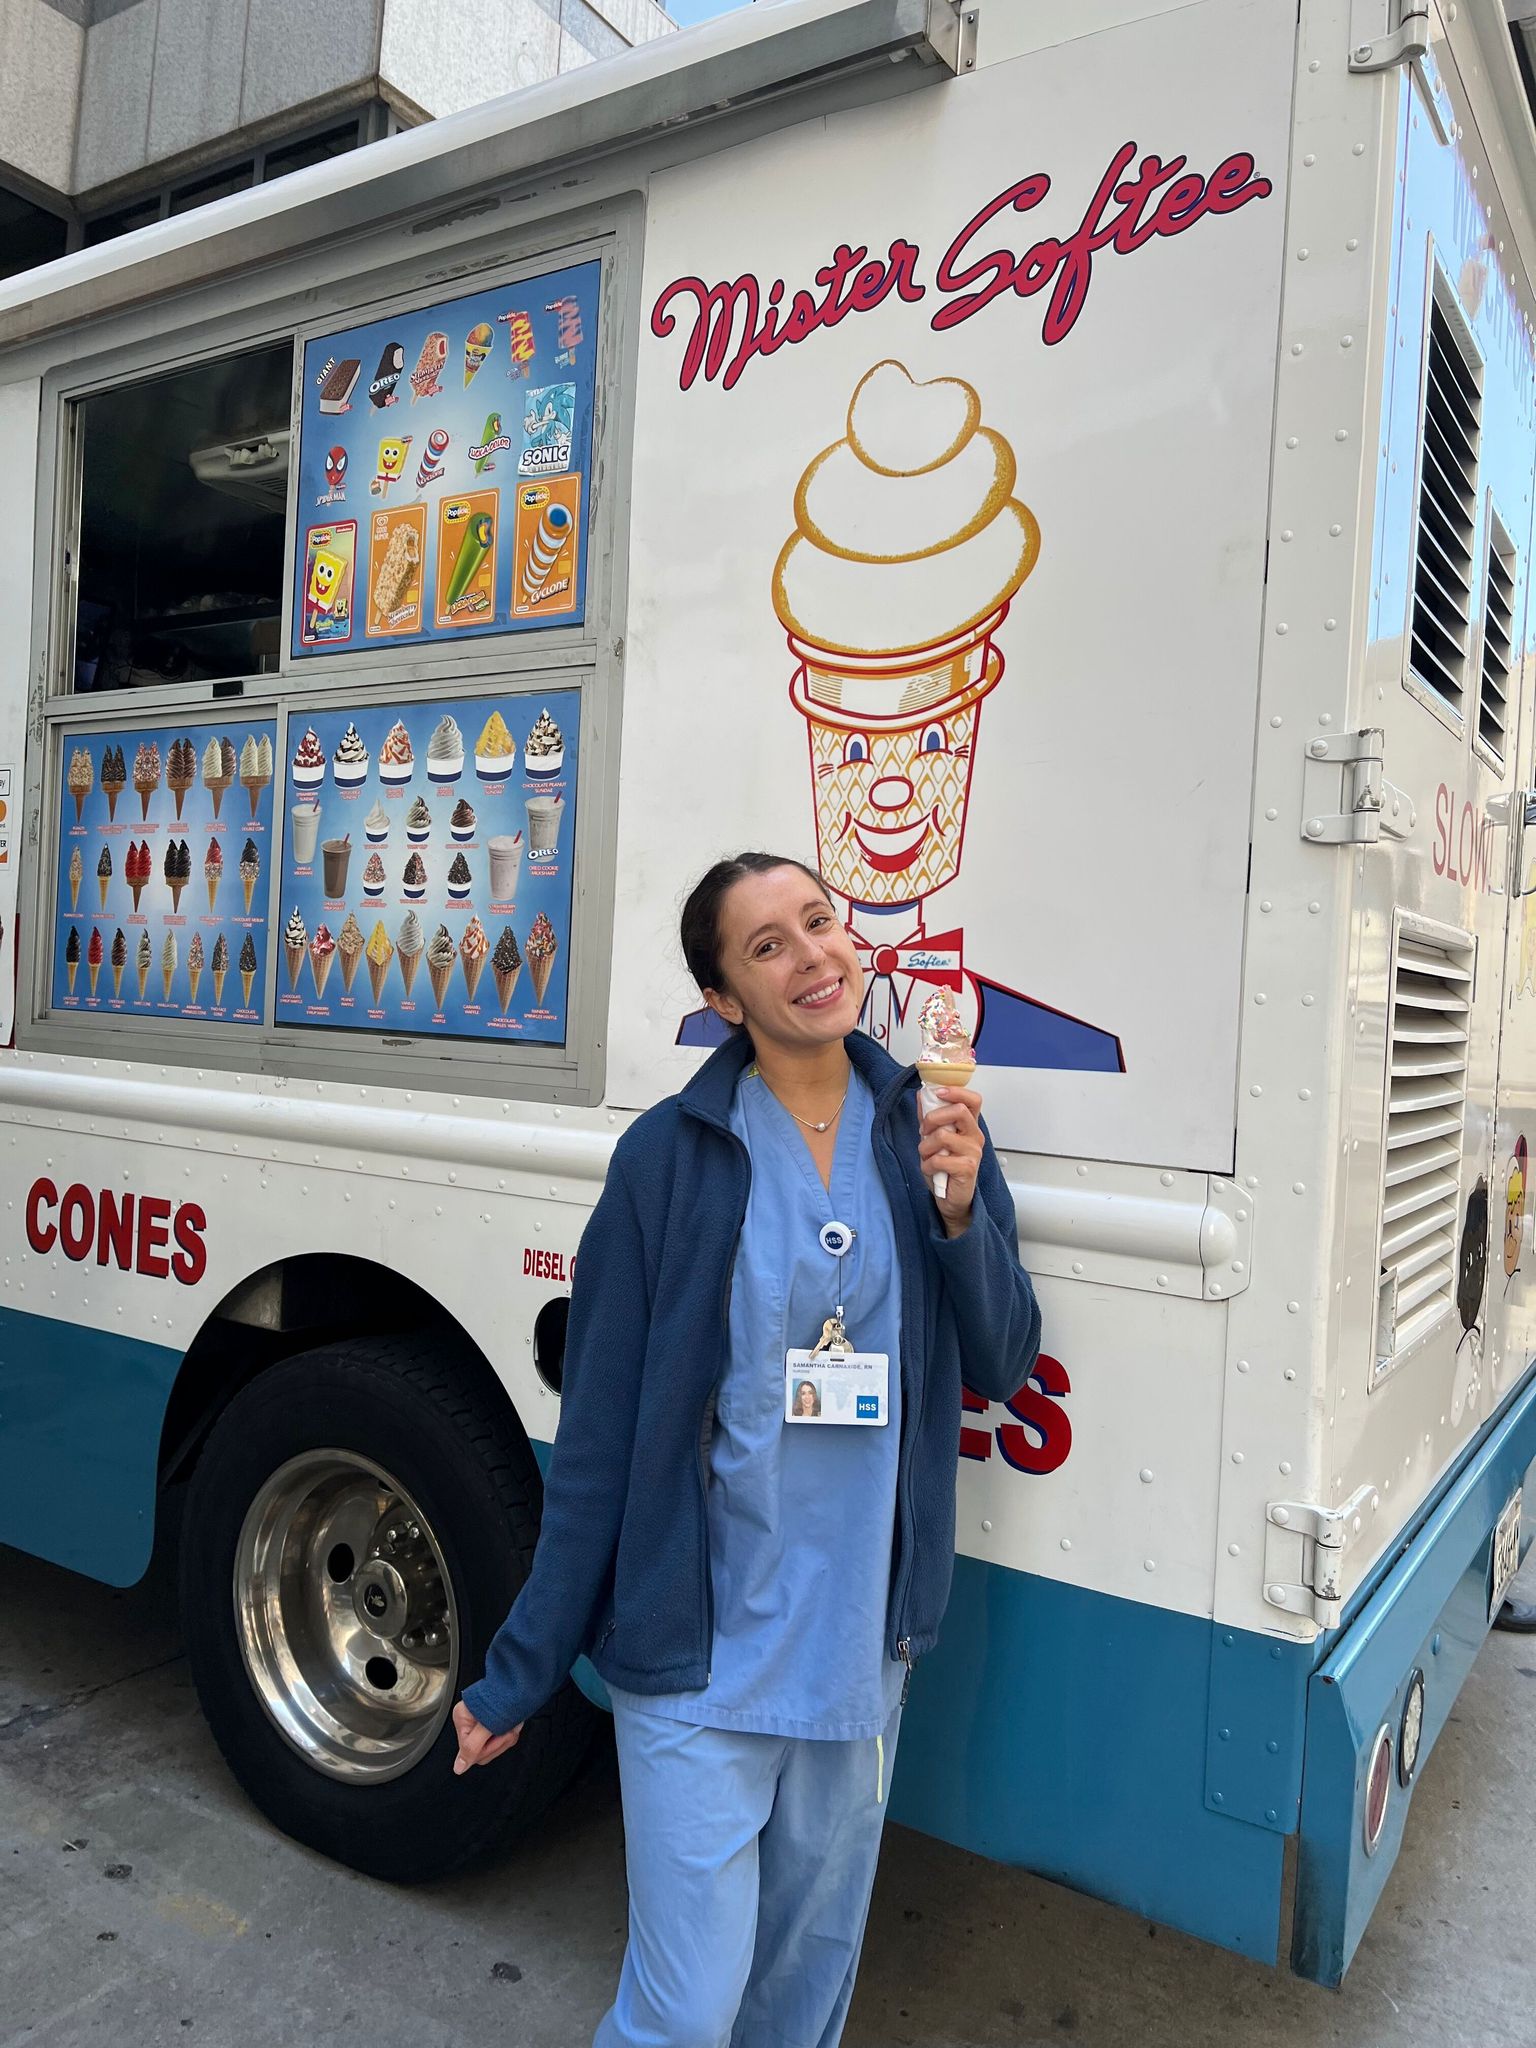 HSS employee holding ice cream cone in front of Mister Softee ice cream truck